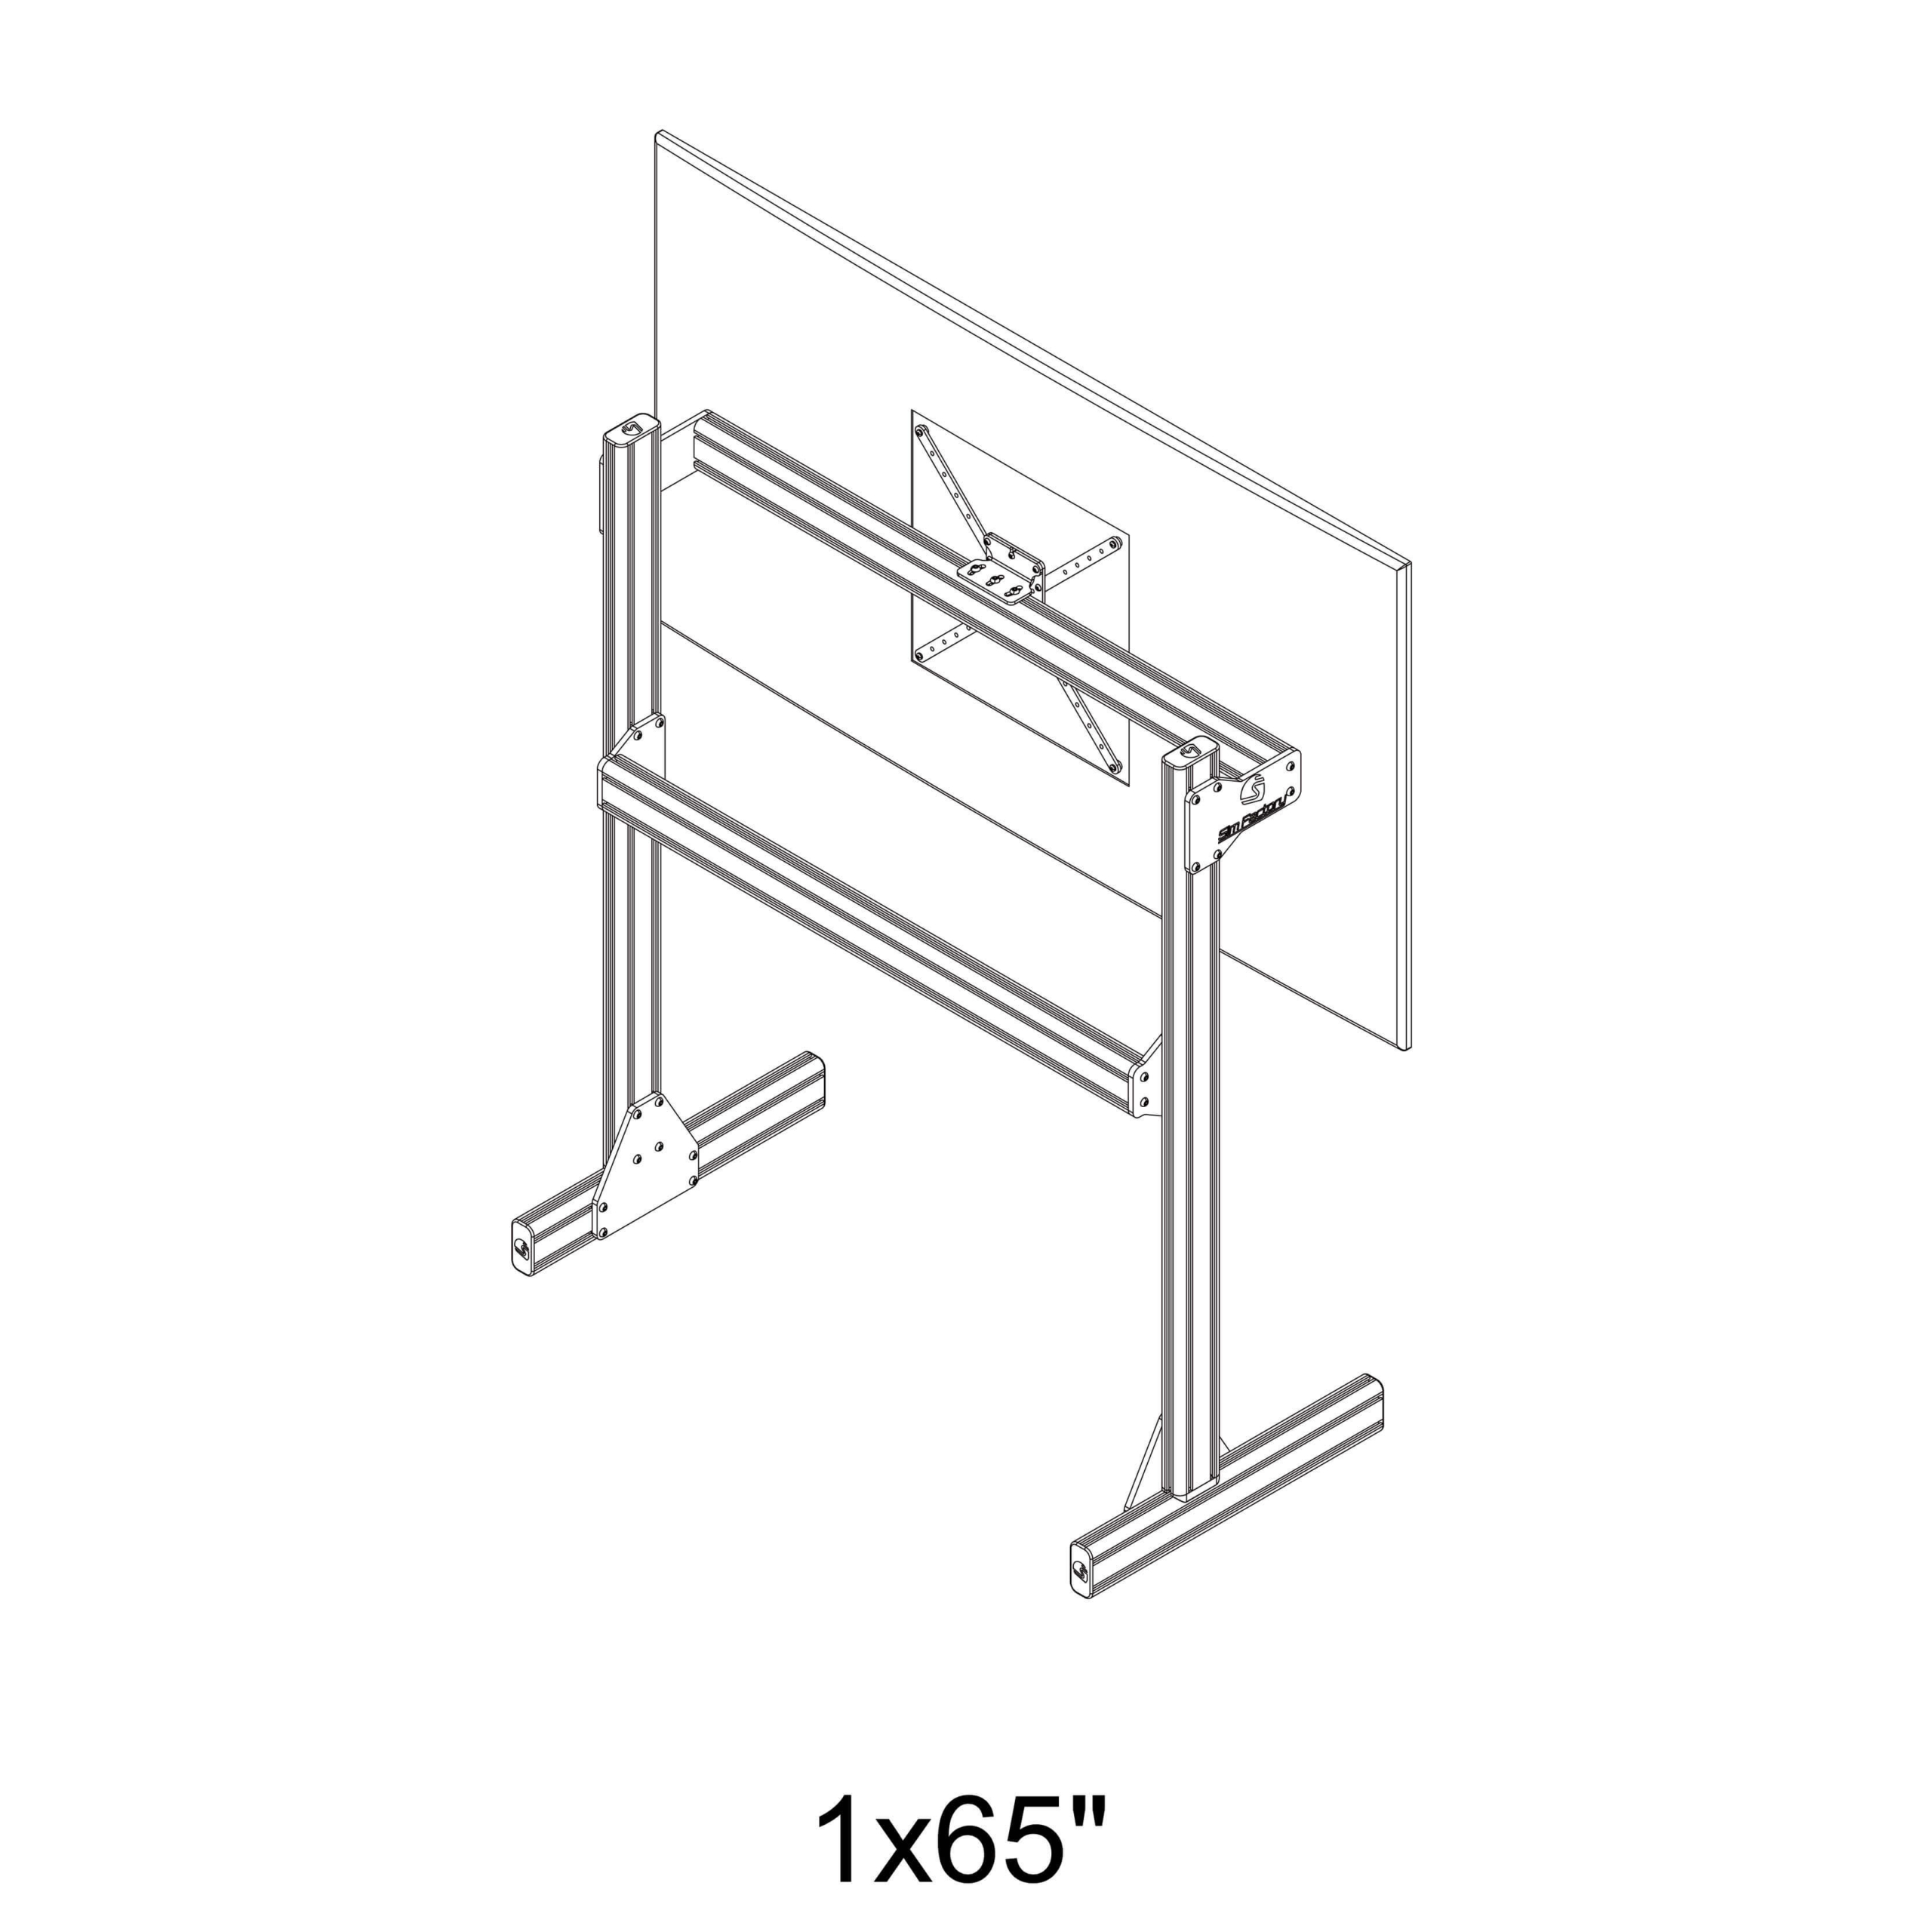 1 single monitor stand 65